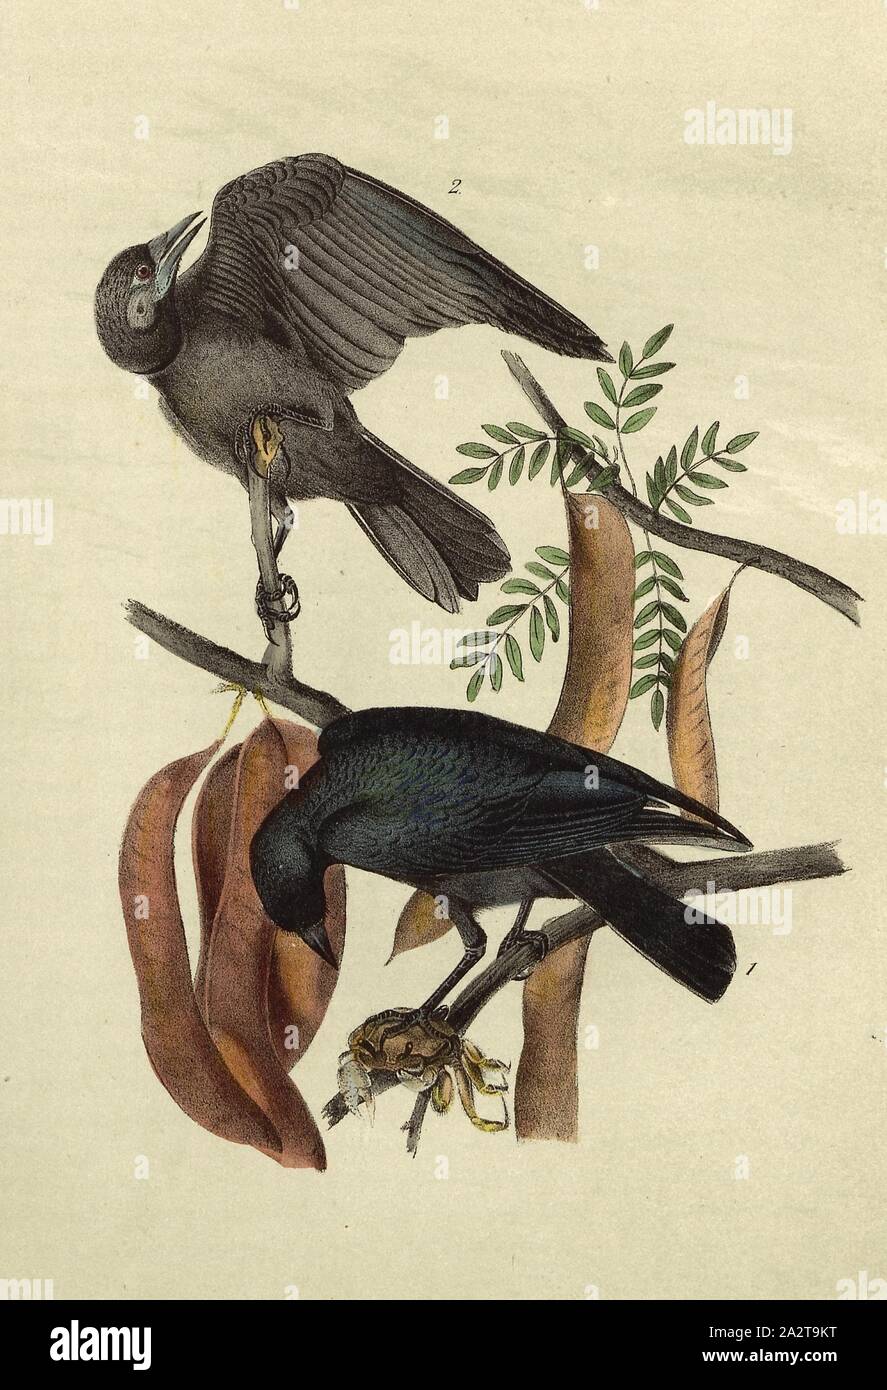 Fish Crow - Honey Locust, Fish Crow (Corvus ossifragus), American Sloth (Gleditsia triacanthos), Signed: J.J. Audubon, J.T. Bowen, lithograph, Pl. 226 (Vol. 4), Audubon, John James (drawn); Bowen, J. T. (lith.), 1856, John James Audubon: The birds of America: from drawings made in the United States and their territories. New York: Audubon, 1856 Stock Photo